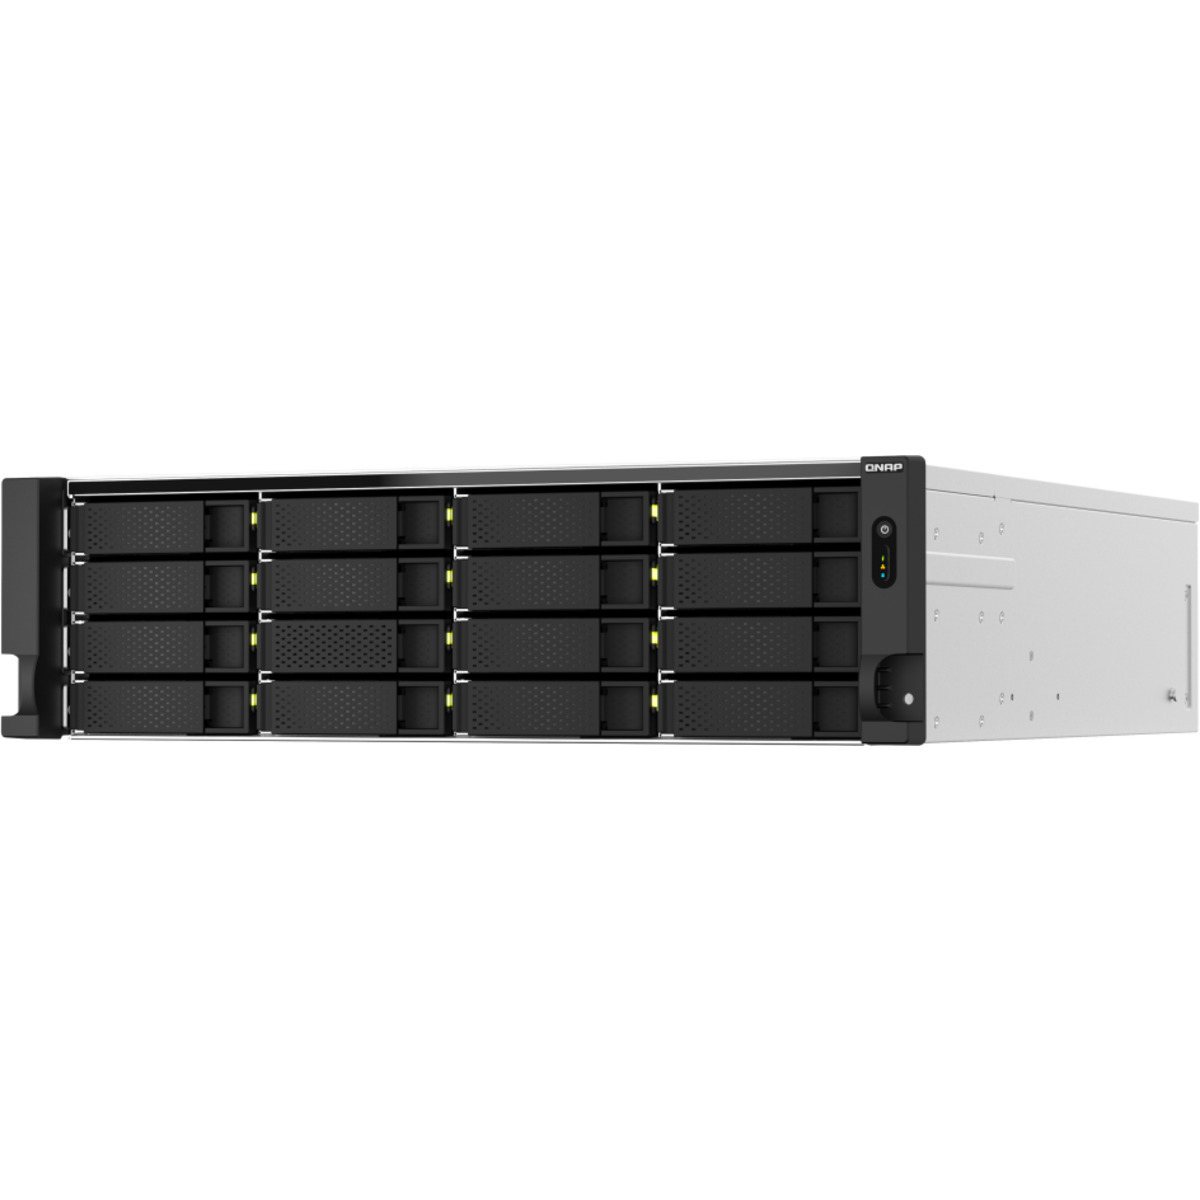 QNAP TS-h2287XU-RP E-2378 QuTS hero Edition 96tb 16+6-Bay RackMount Large Business / Enterprise NAS - Network Attached Storage Device 16x6tb Western Digital Red Plus WD60EFPX 3.5 5640rpm SATA 6Gb/s HDD NAS Class Drives Installed - Burn-In Tested TS-h2287XU-RP E-2378 QuTS hero Edition